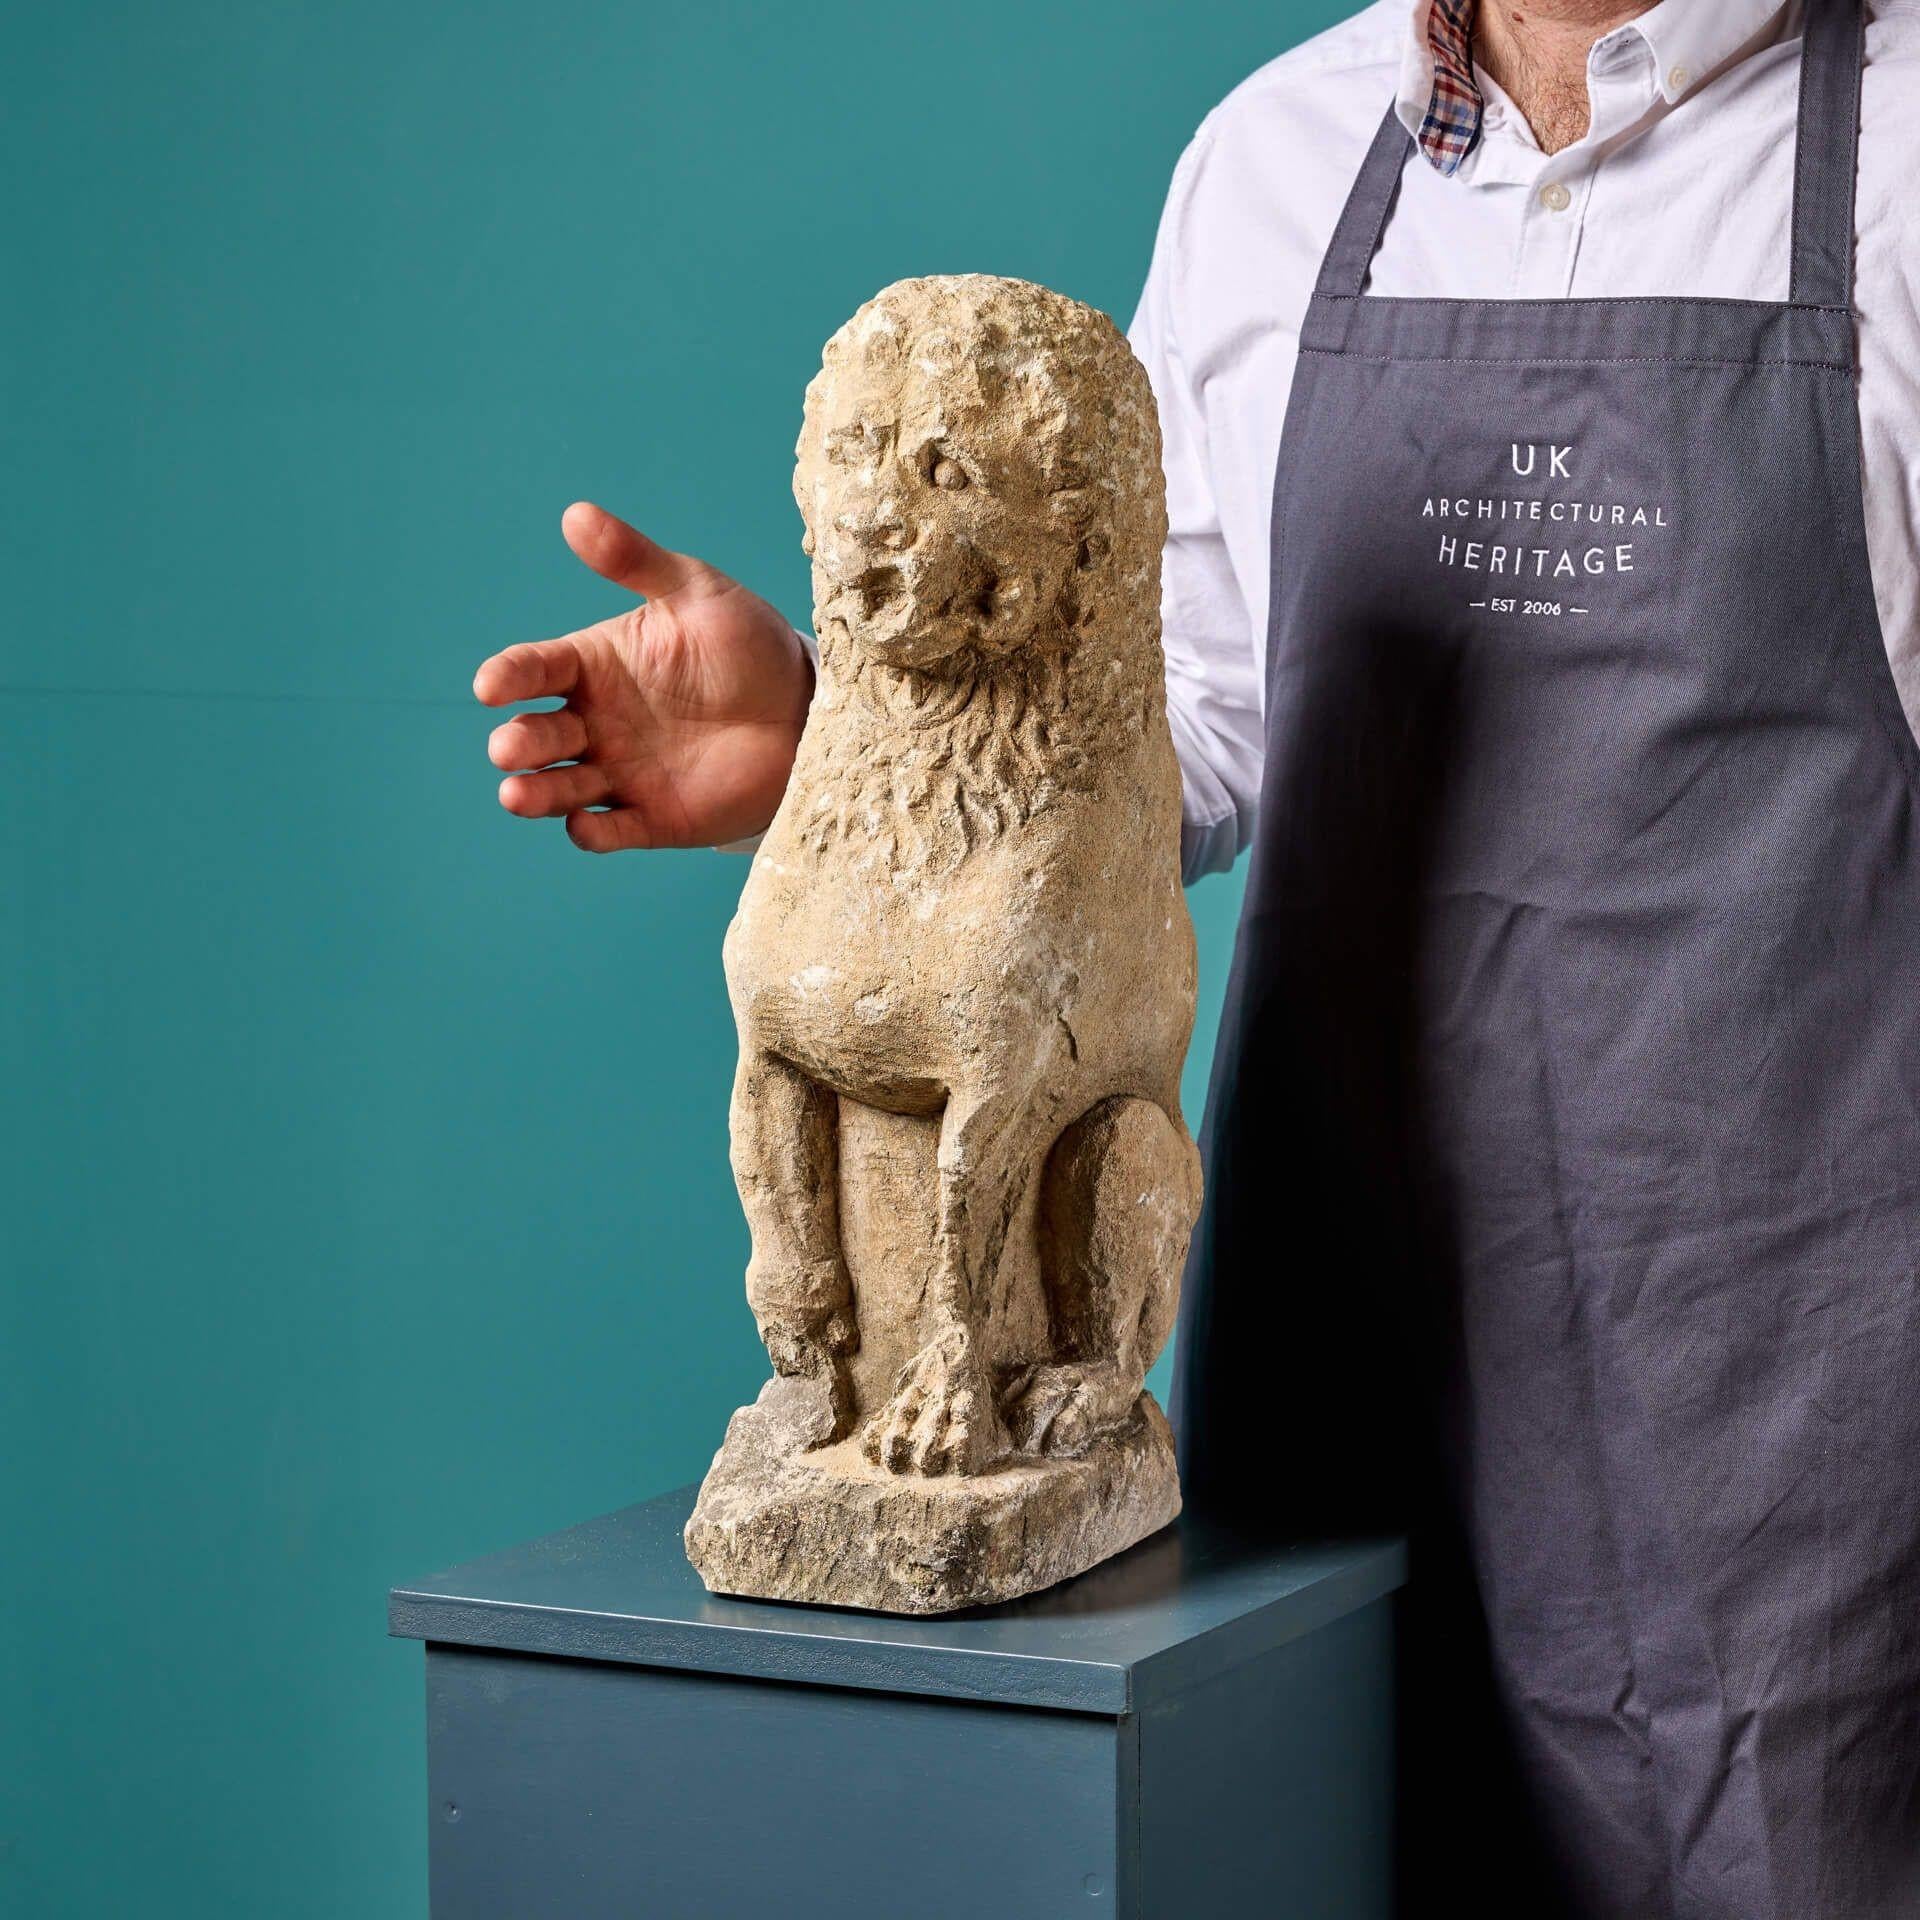 An English hand carved limestone lion statue possibly dating from as early as the 16th century. Made at the hand of a talented artisan, the limestone is detailed with tooling and chisel marks made by the maker throughout, depicting a small lion in a